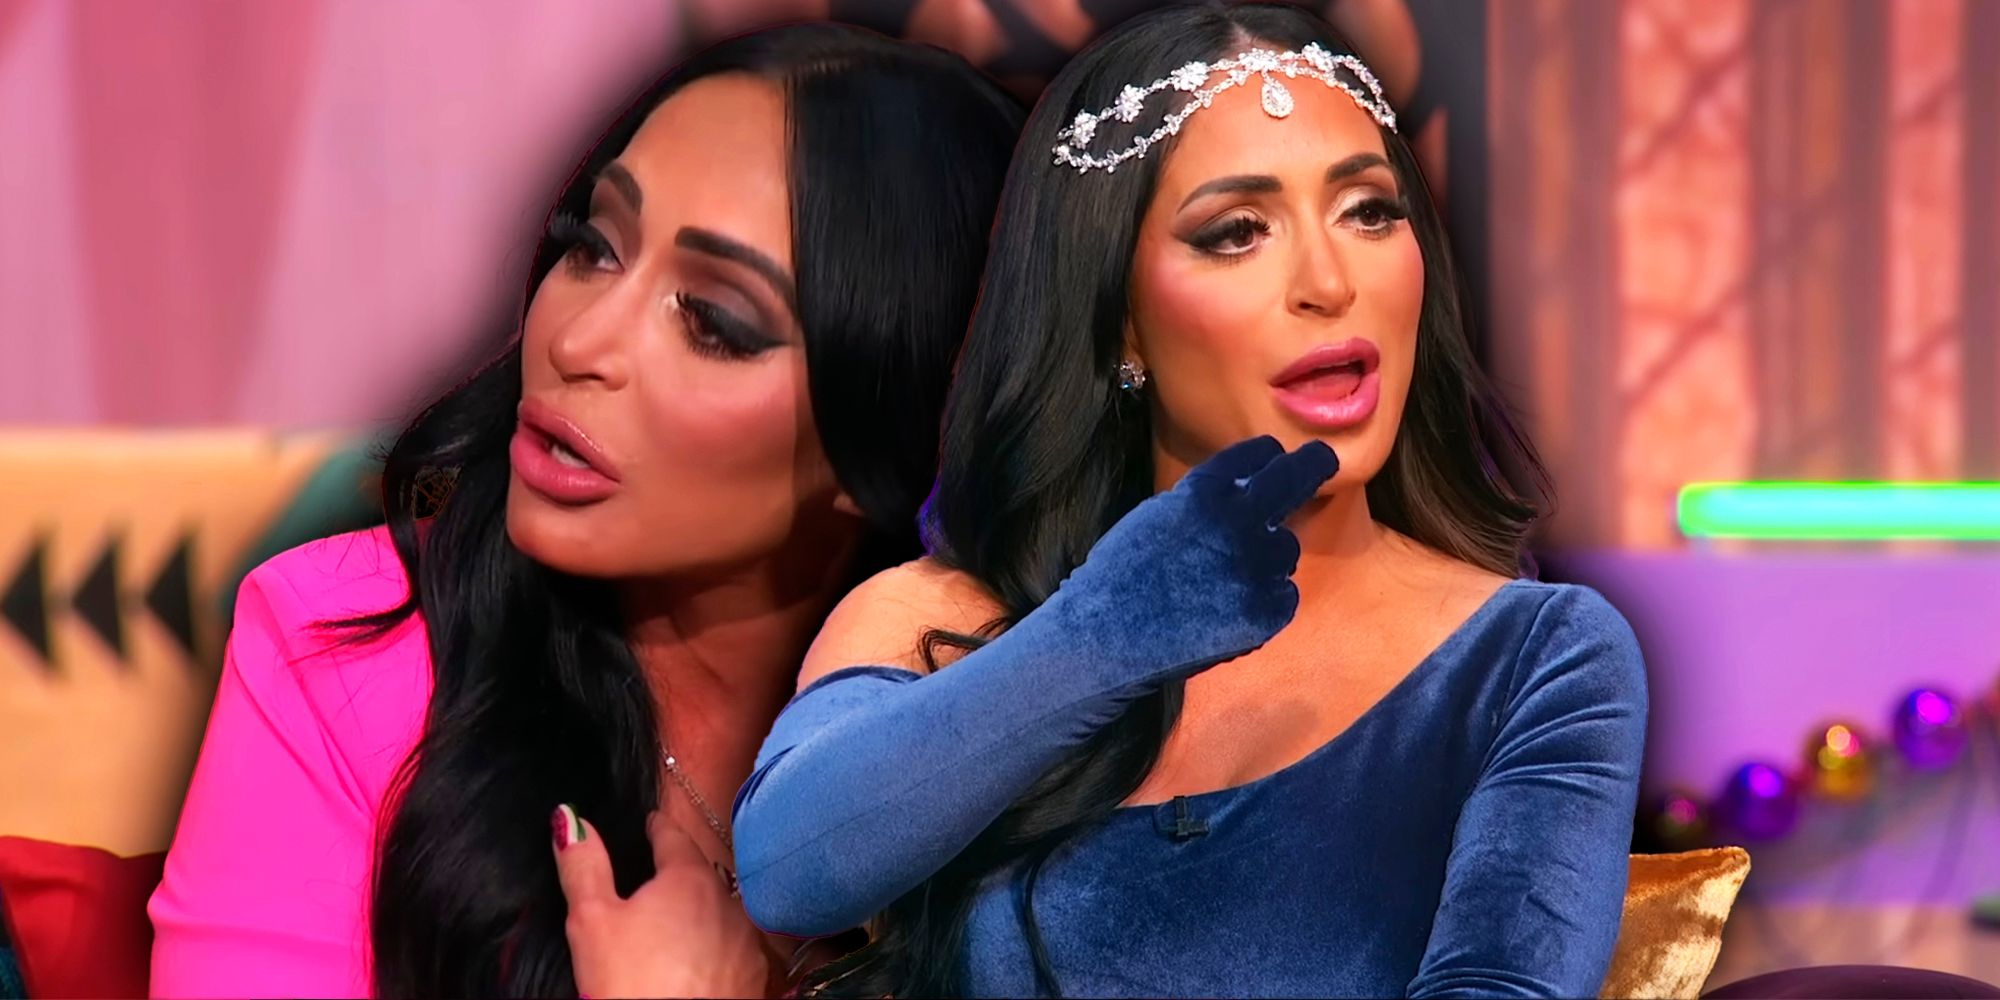 Montage of Jersey Shore's Angelina Pivarnick